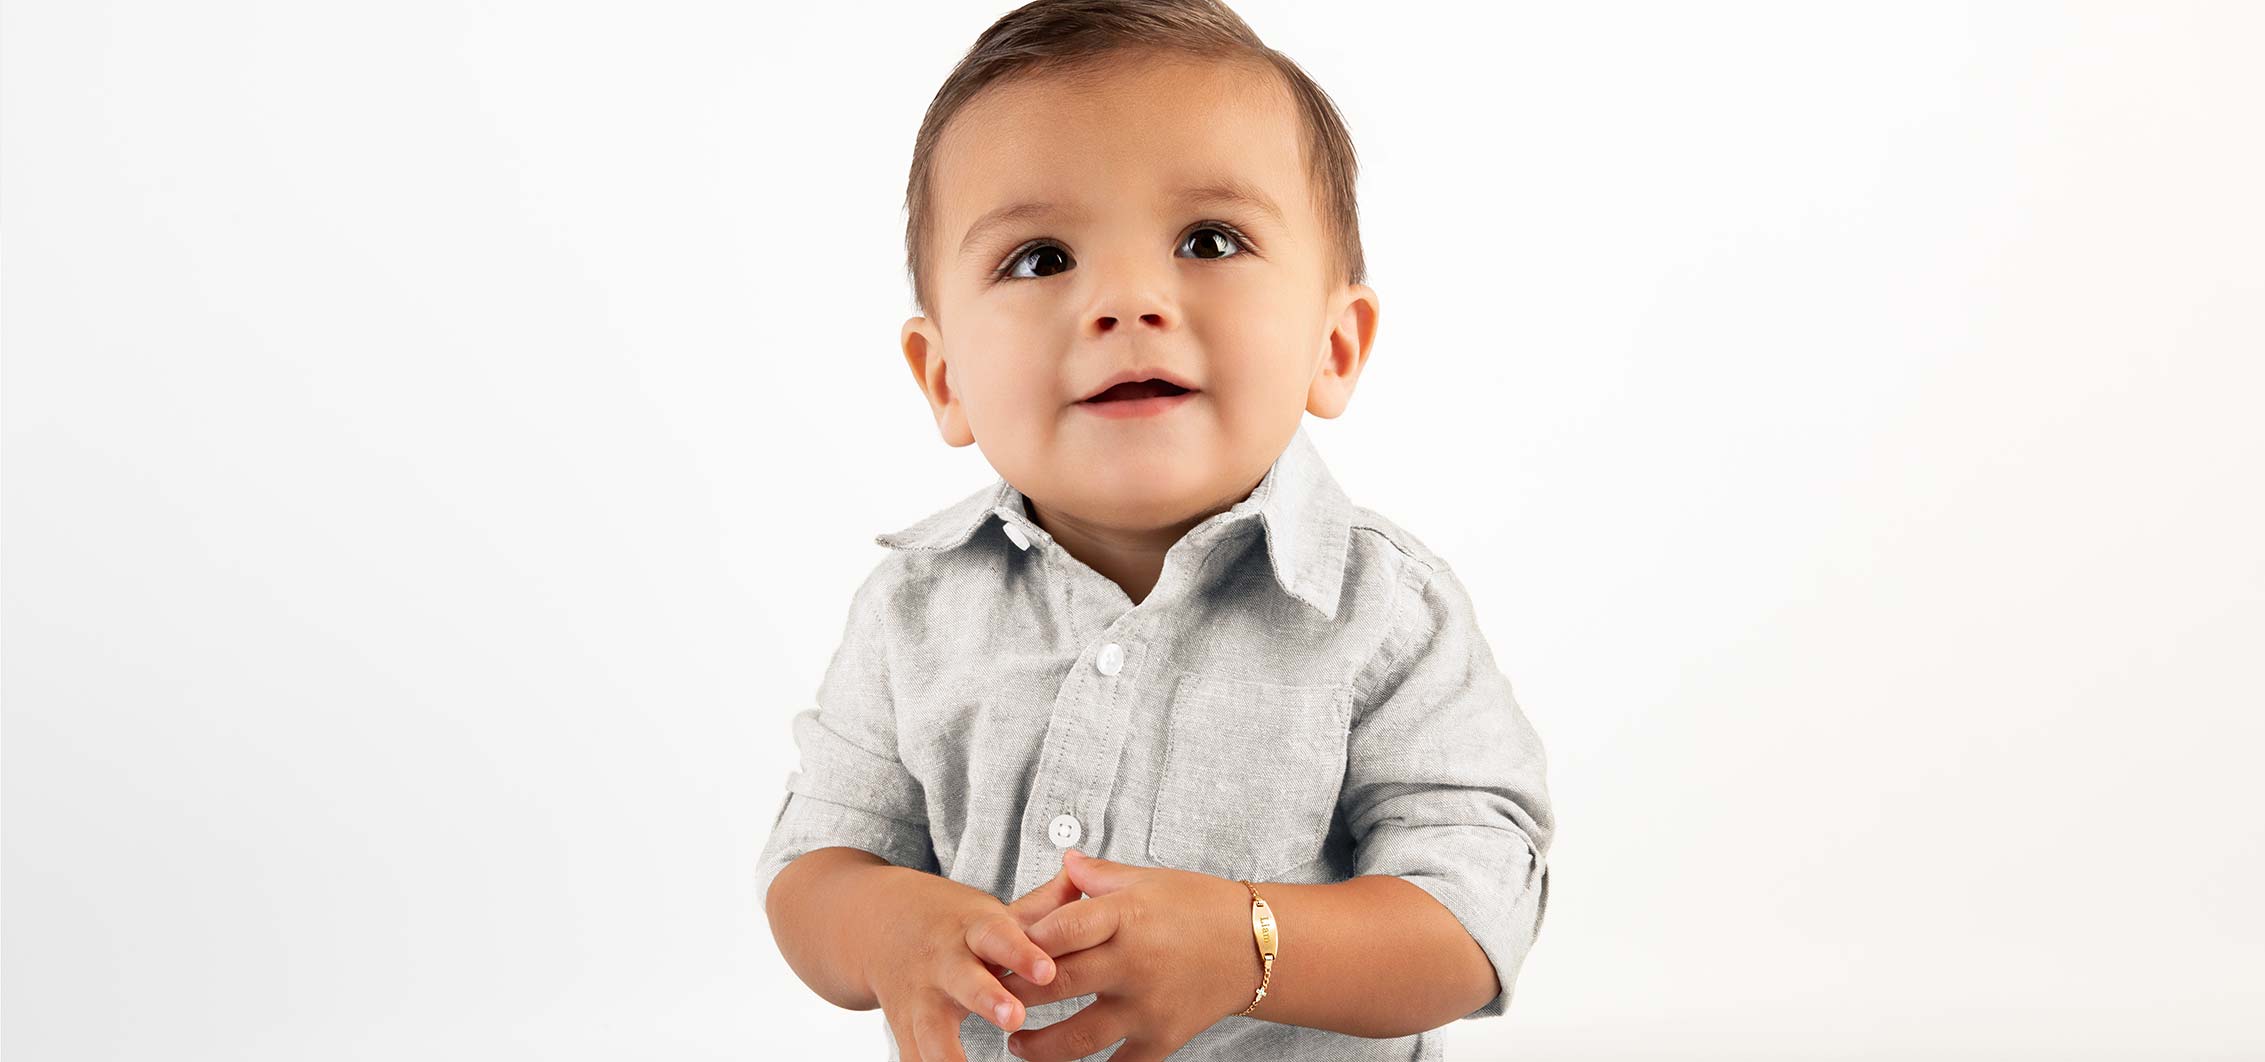 Christening & Baptism Jewelry Gifts for Boys